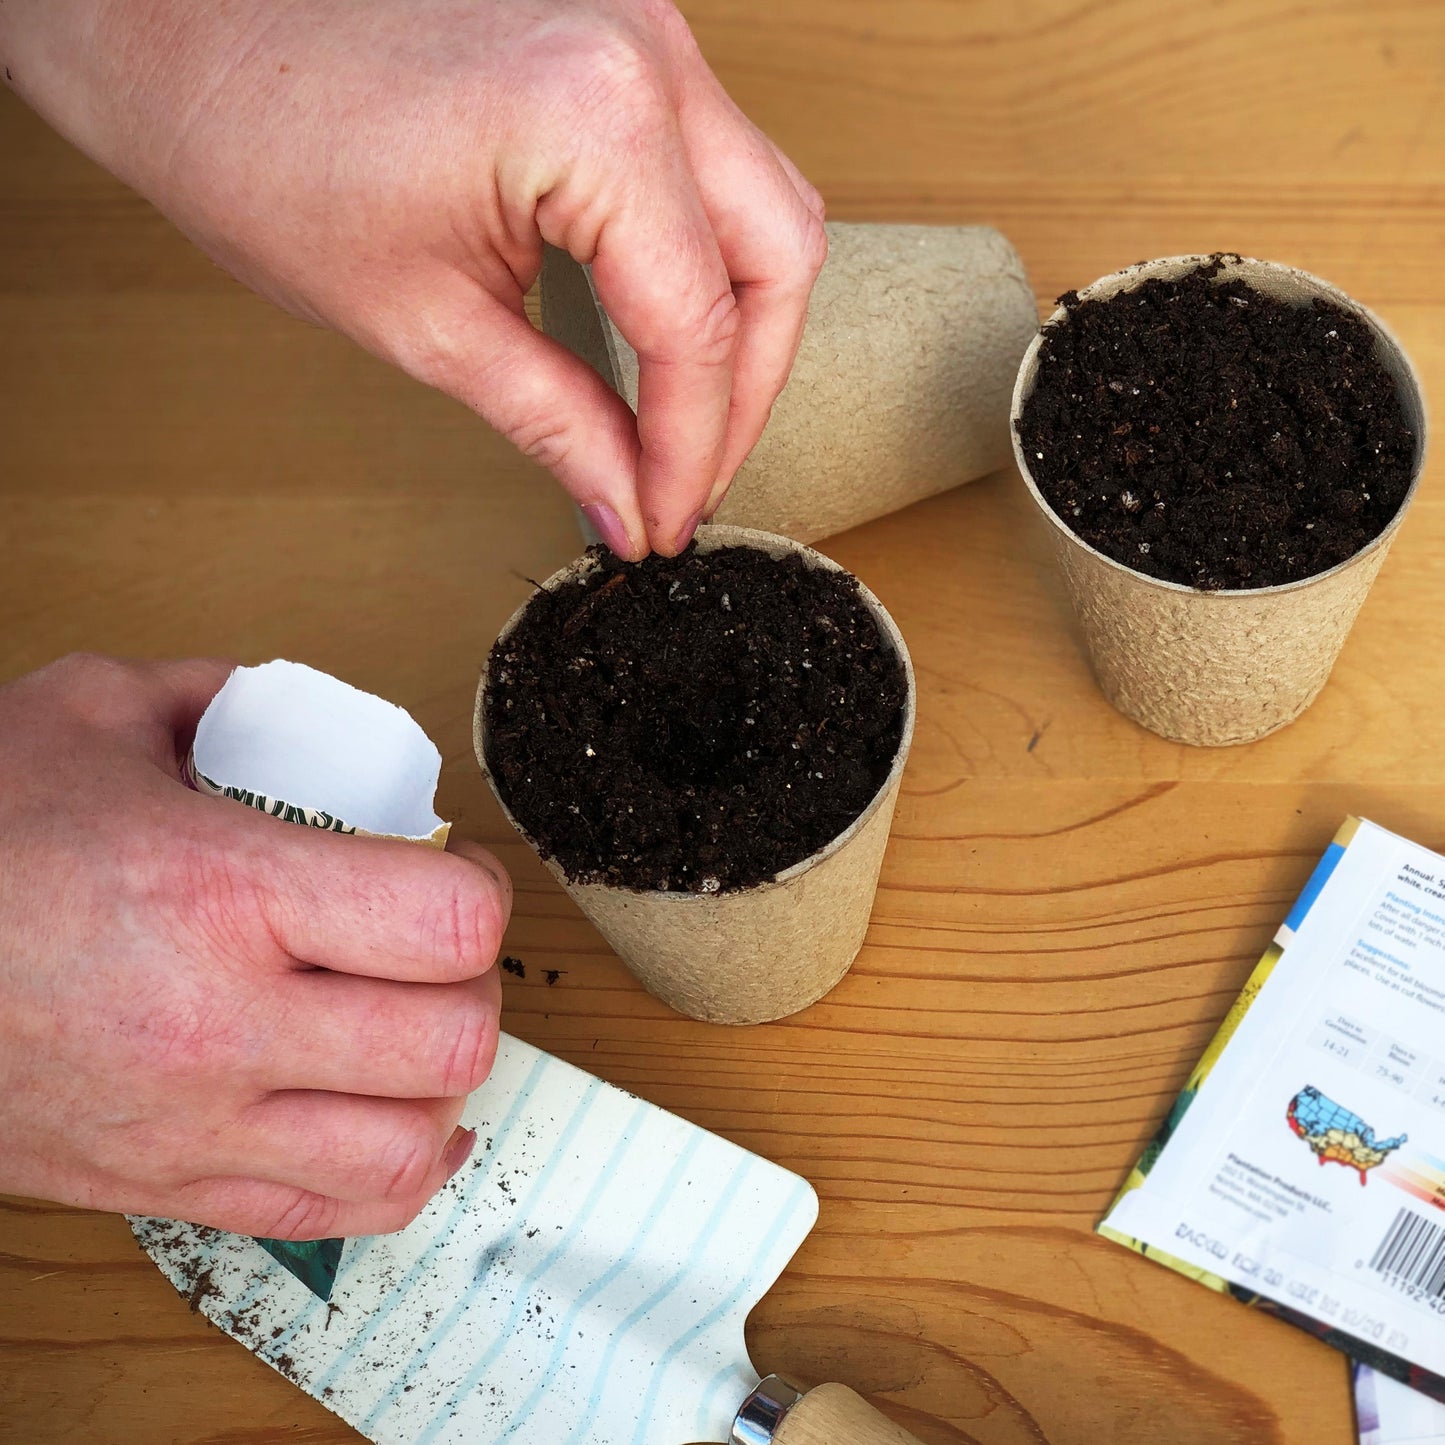 Plant Sweet Banana Pepper seeds into Jiffy biodegradable peat pots filled with seed starting mix.